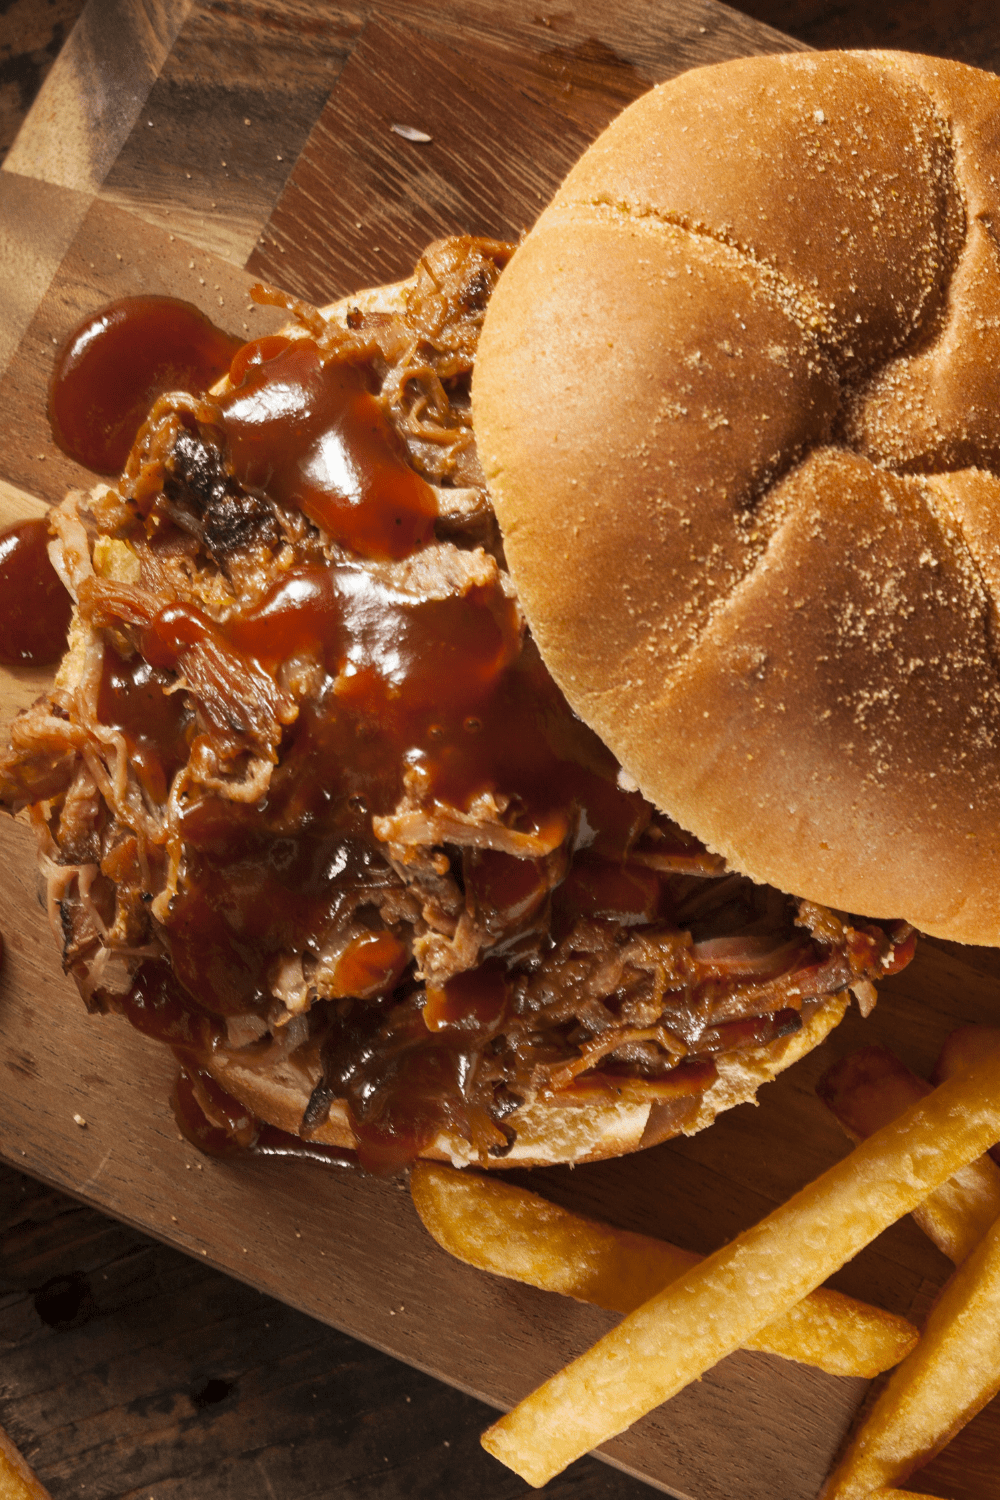 Pulled pork sandwich served with Bbq sauce and fries on top of a wooden board.